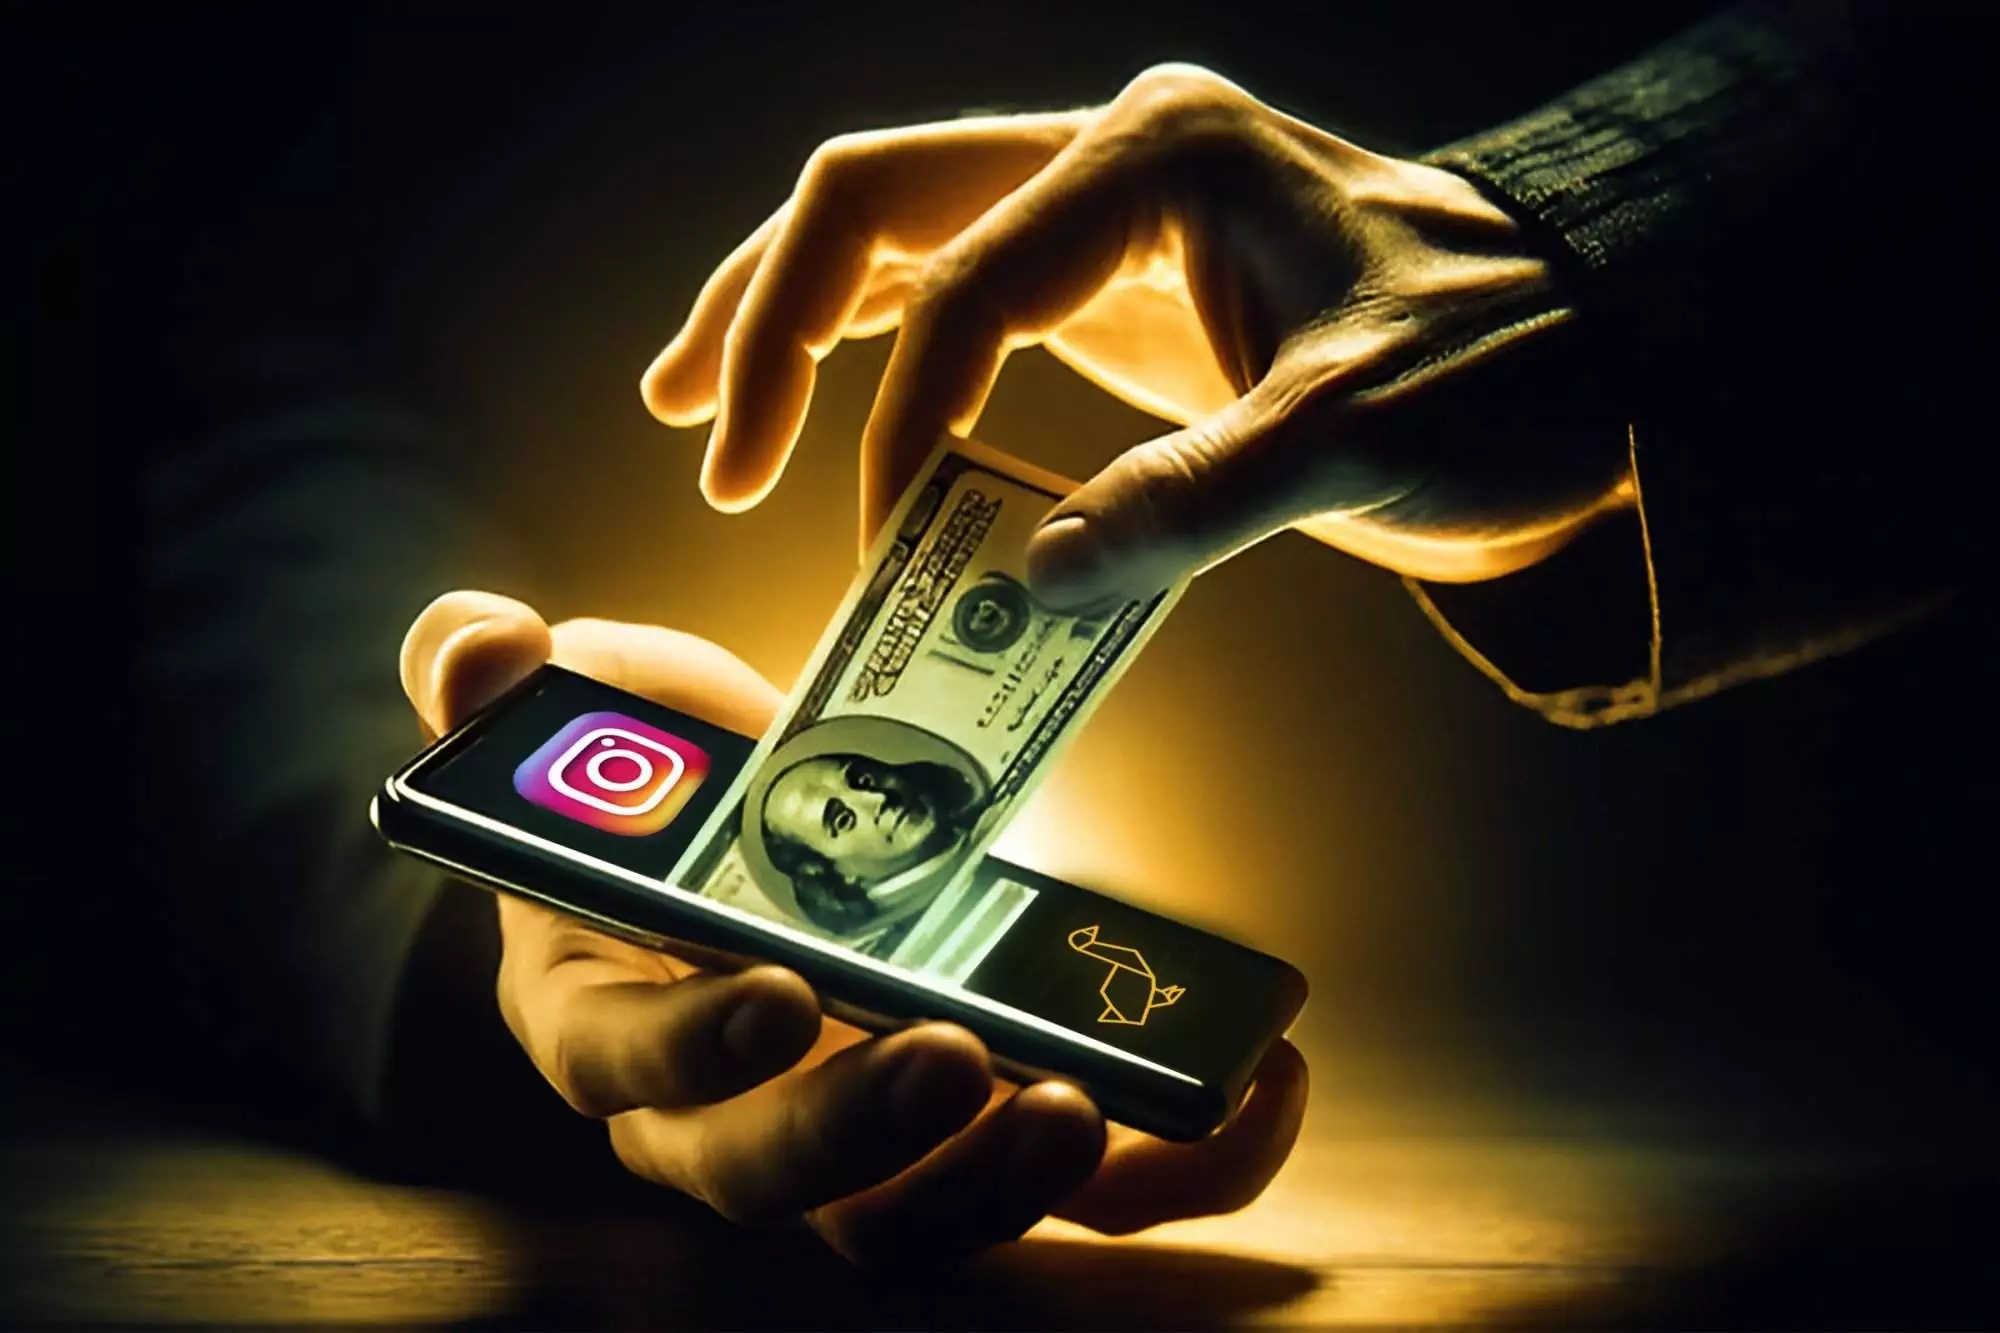 Hands exchanging money over a smartphone with Instagram icon